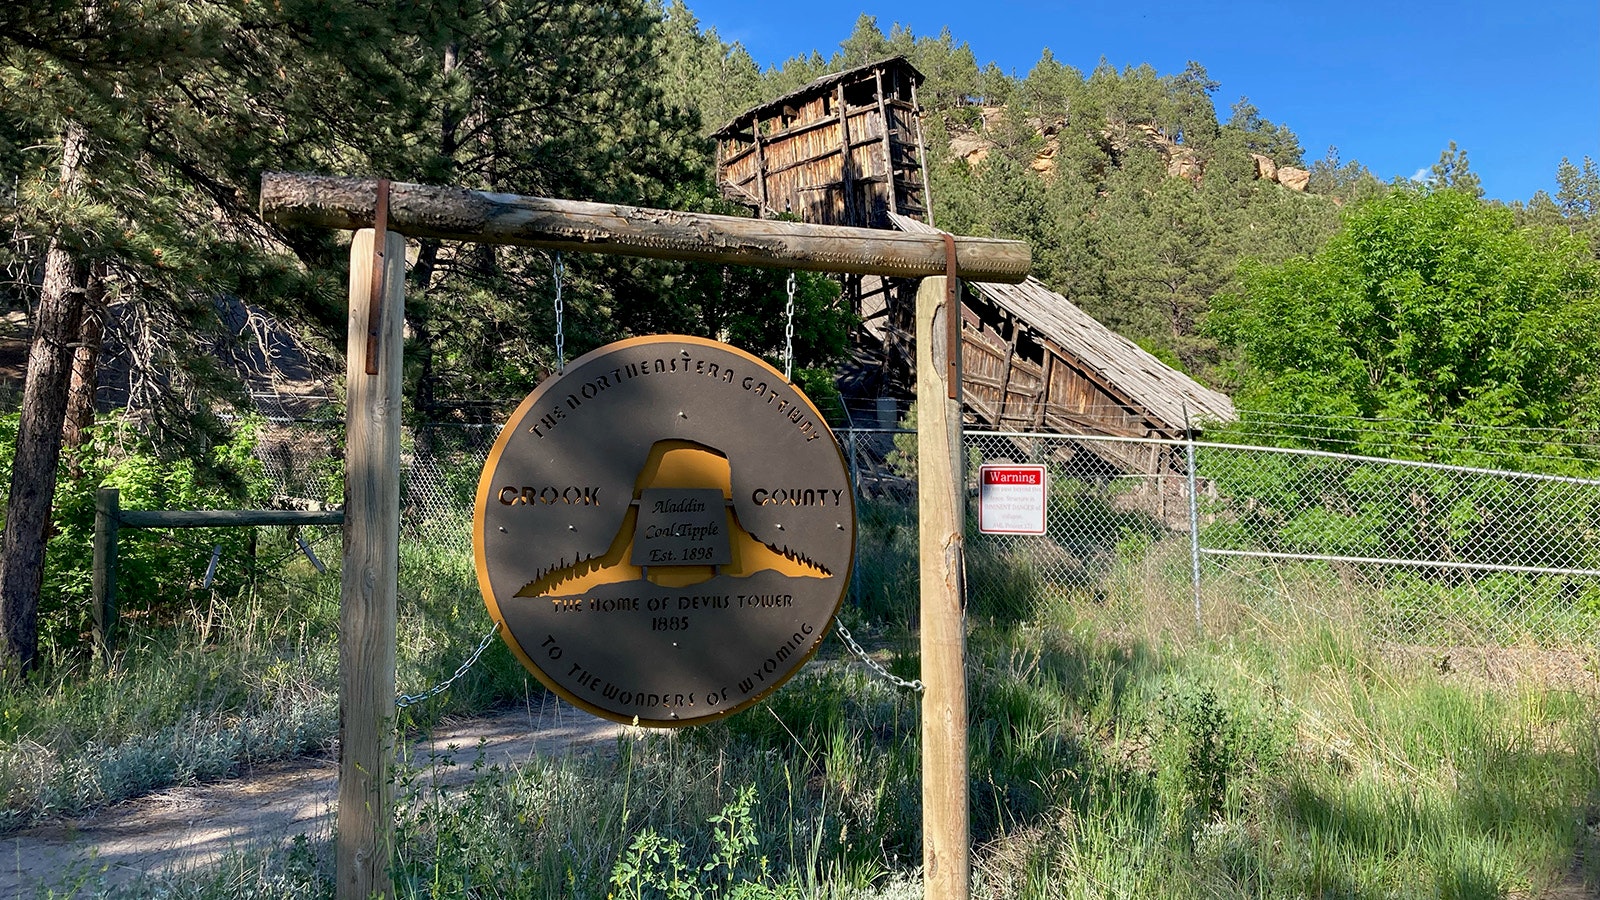 Built between 1888 and 1895, the Aladdin Coal Tipple in northeast Wyoming is one of the remaining wooden coal tipples still standing in the Western United States, but it's in bad shape and could collapse at any time.